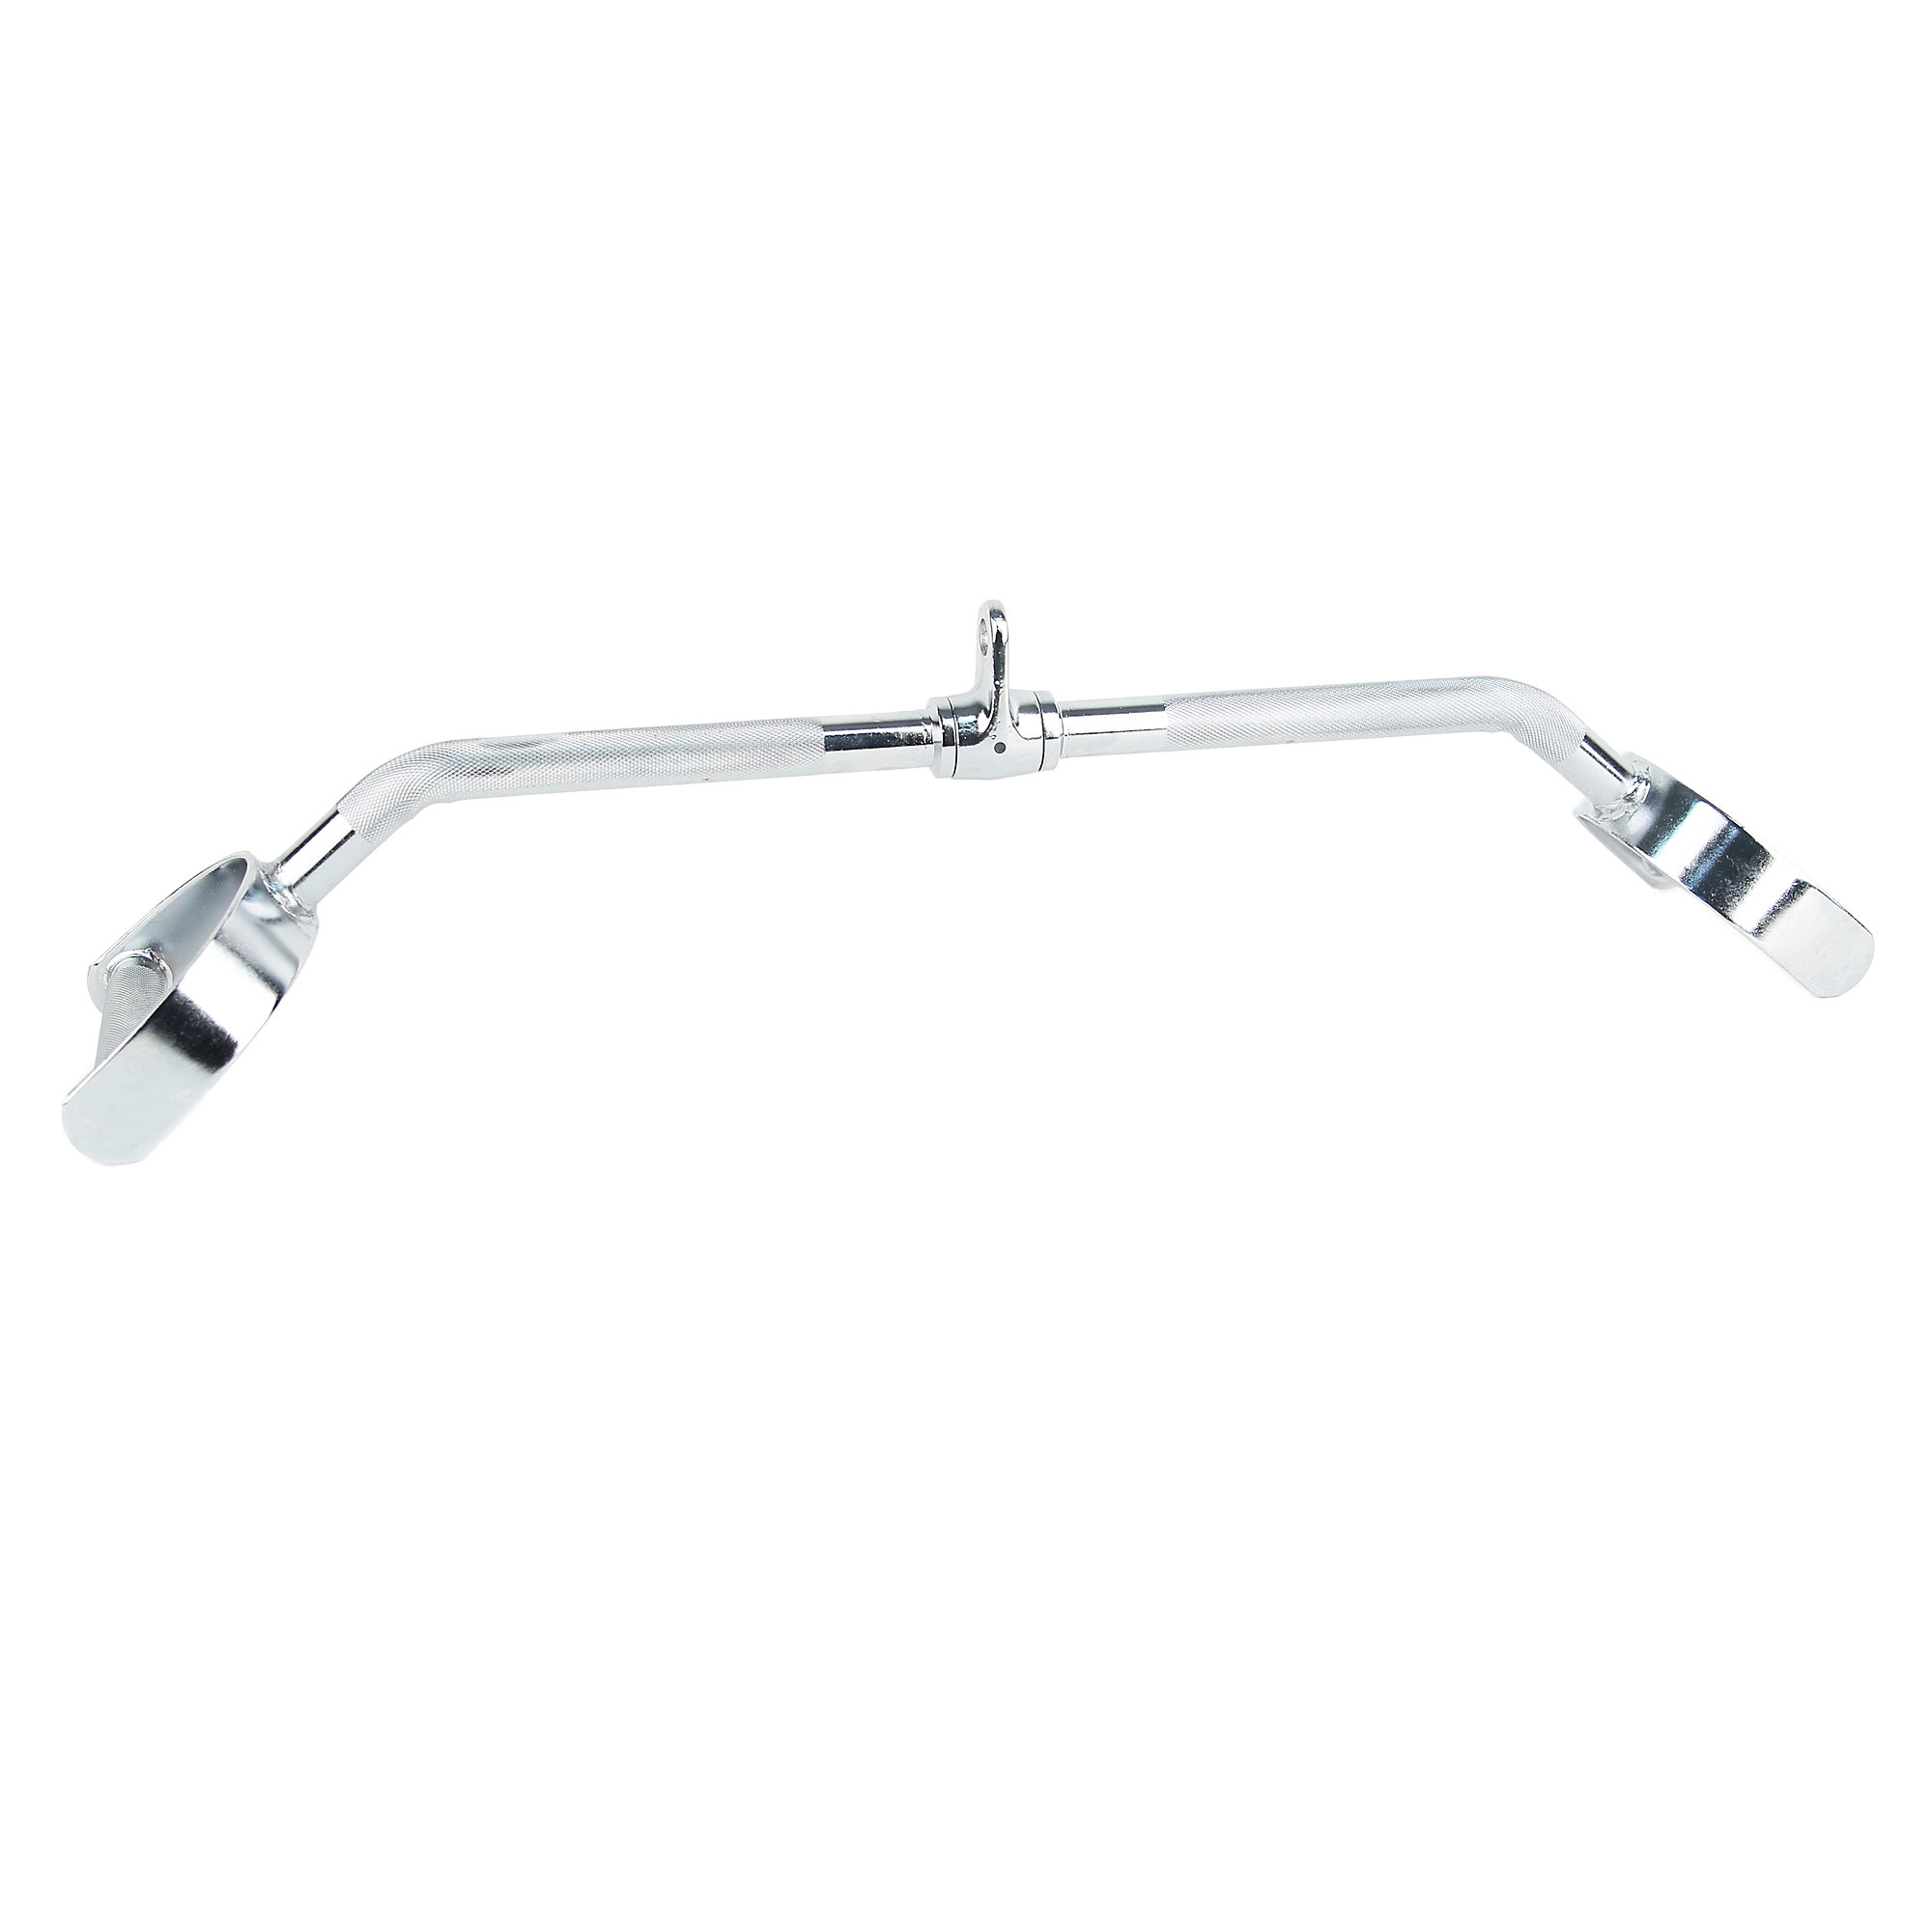 30" Pro-Style Cambered Lat Bar with Stirrup Handles and Knurled Grips